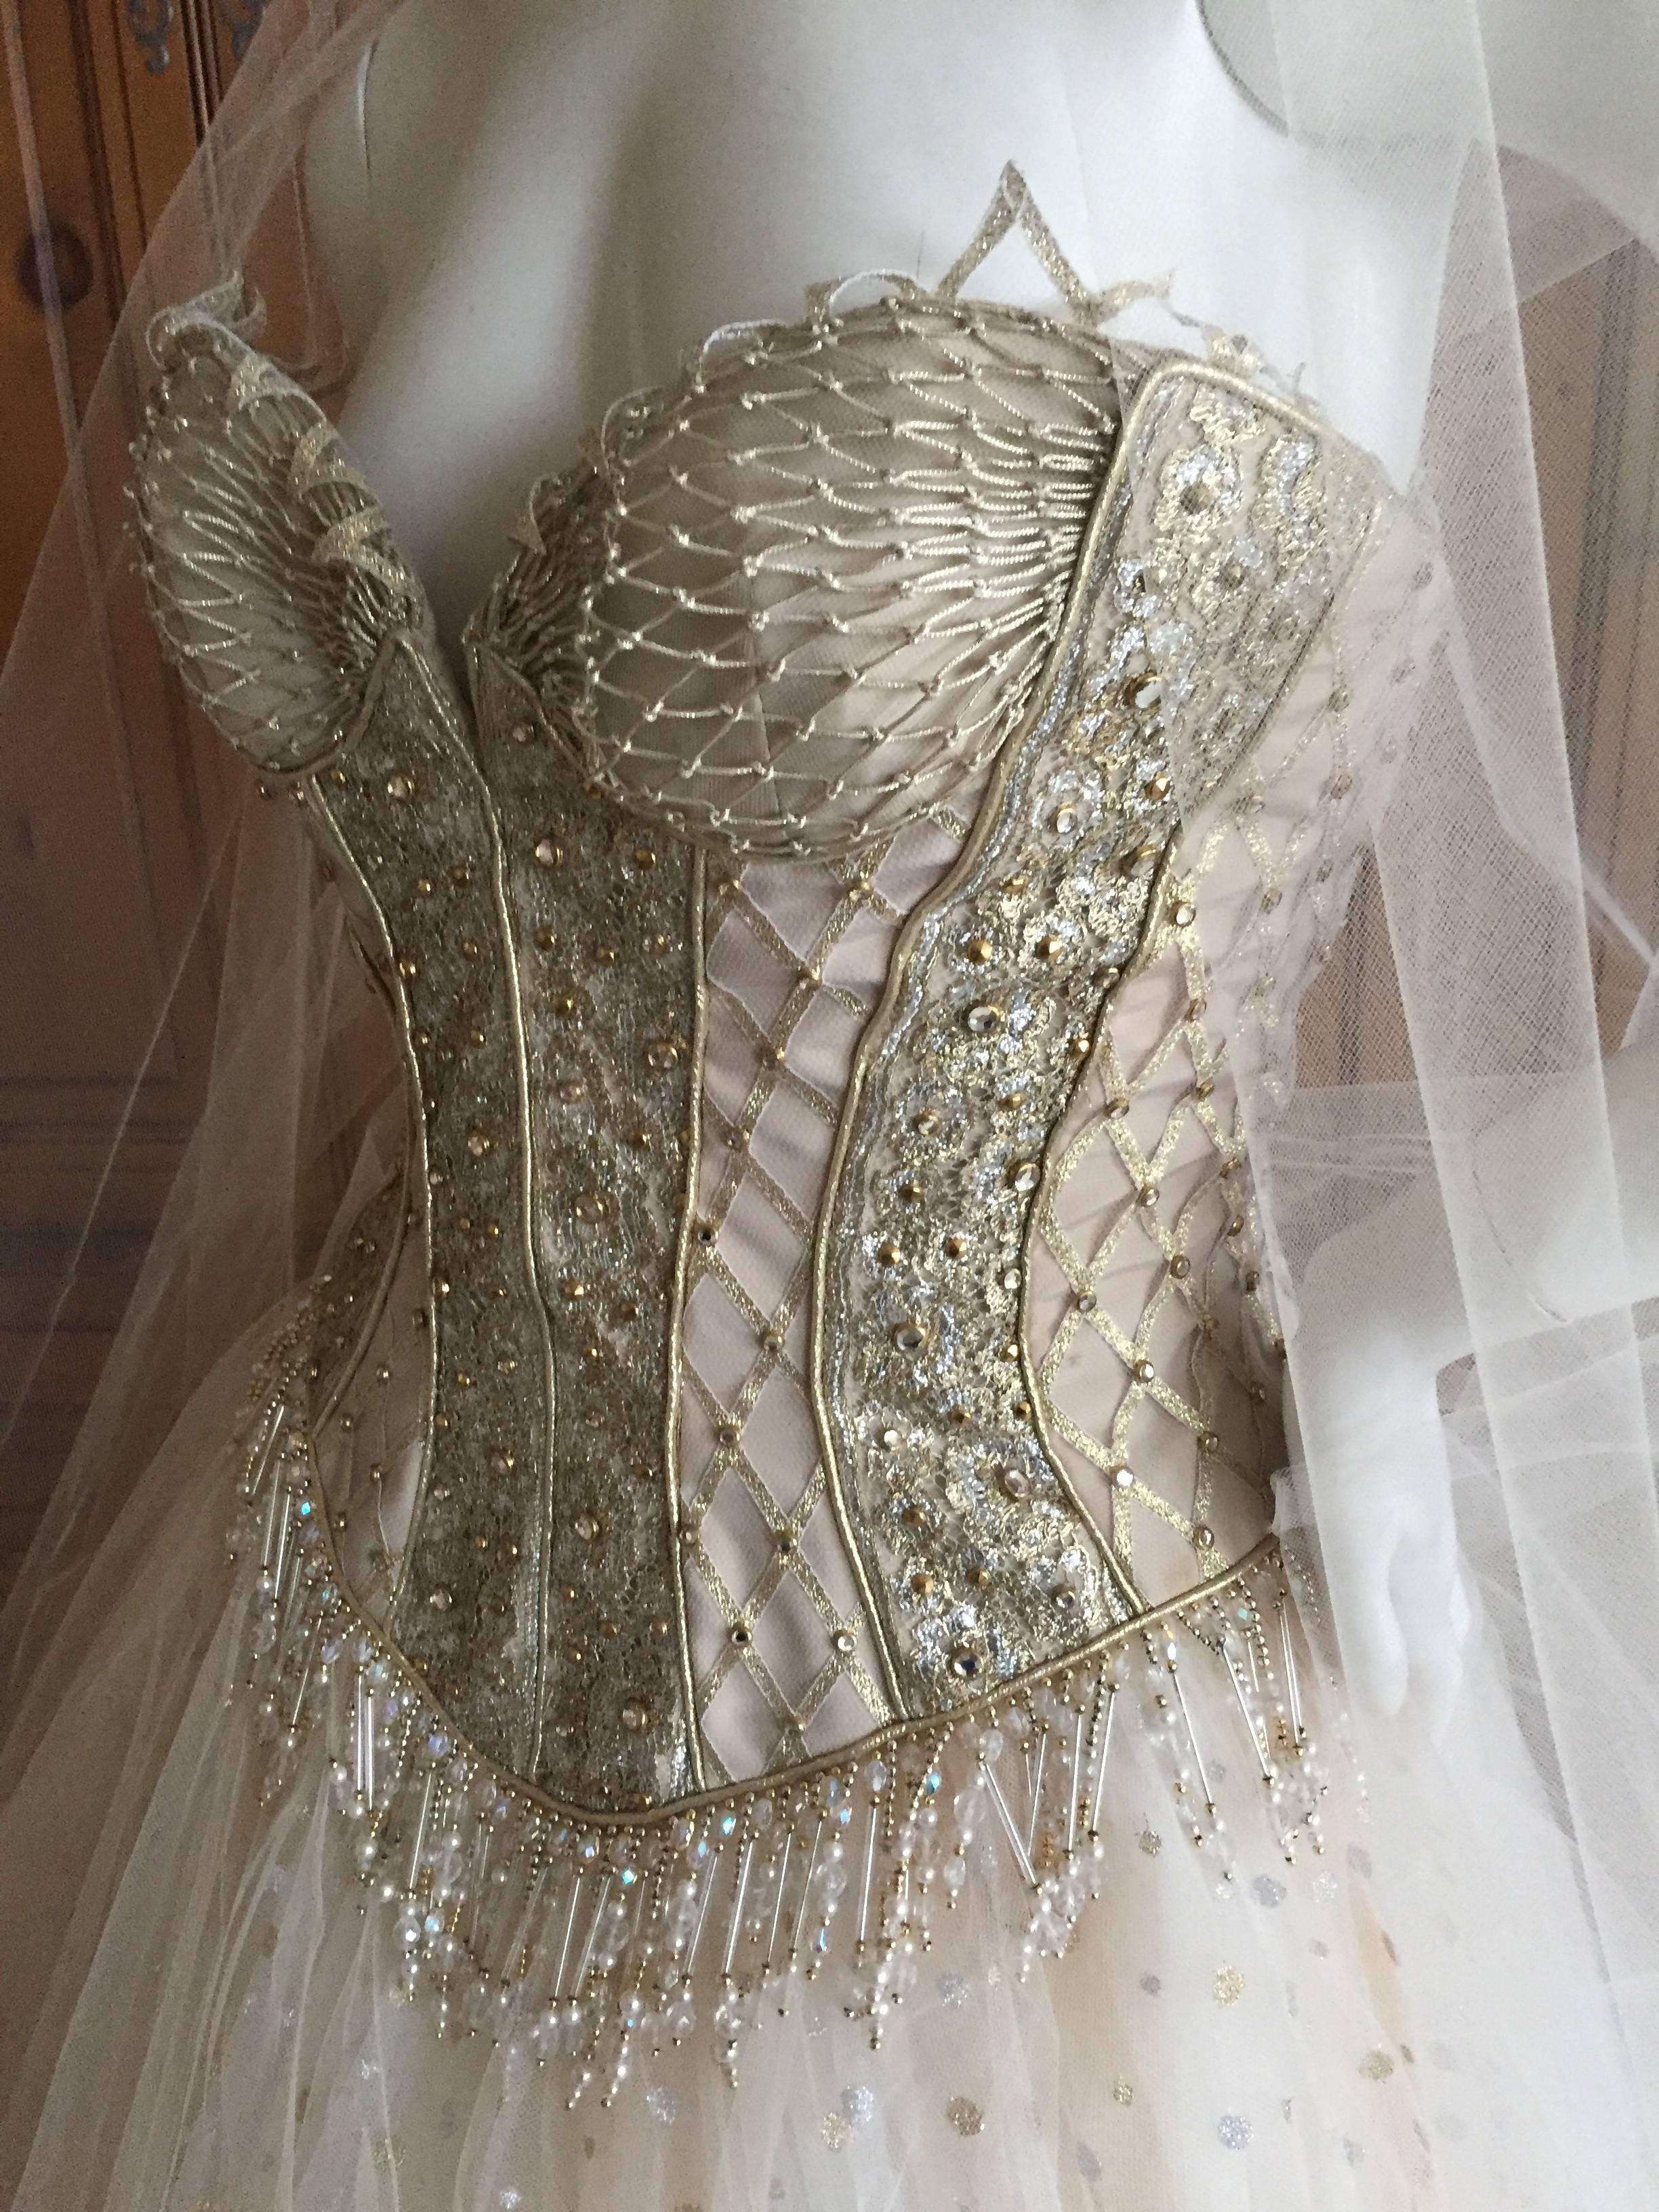 Bob Mackie dreamy ivory ballerina dress.
Ivory with silver and gold accents, with light brown topaz crystals
This is so romantic, the skirt is very full with under layers expertly draped.
The corset top is embellished with crystals overlaid on